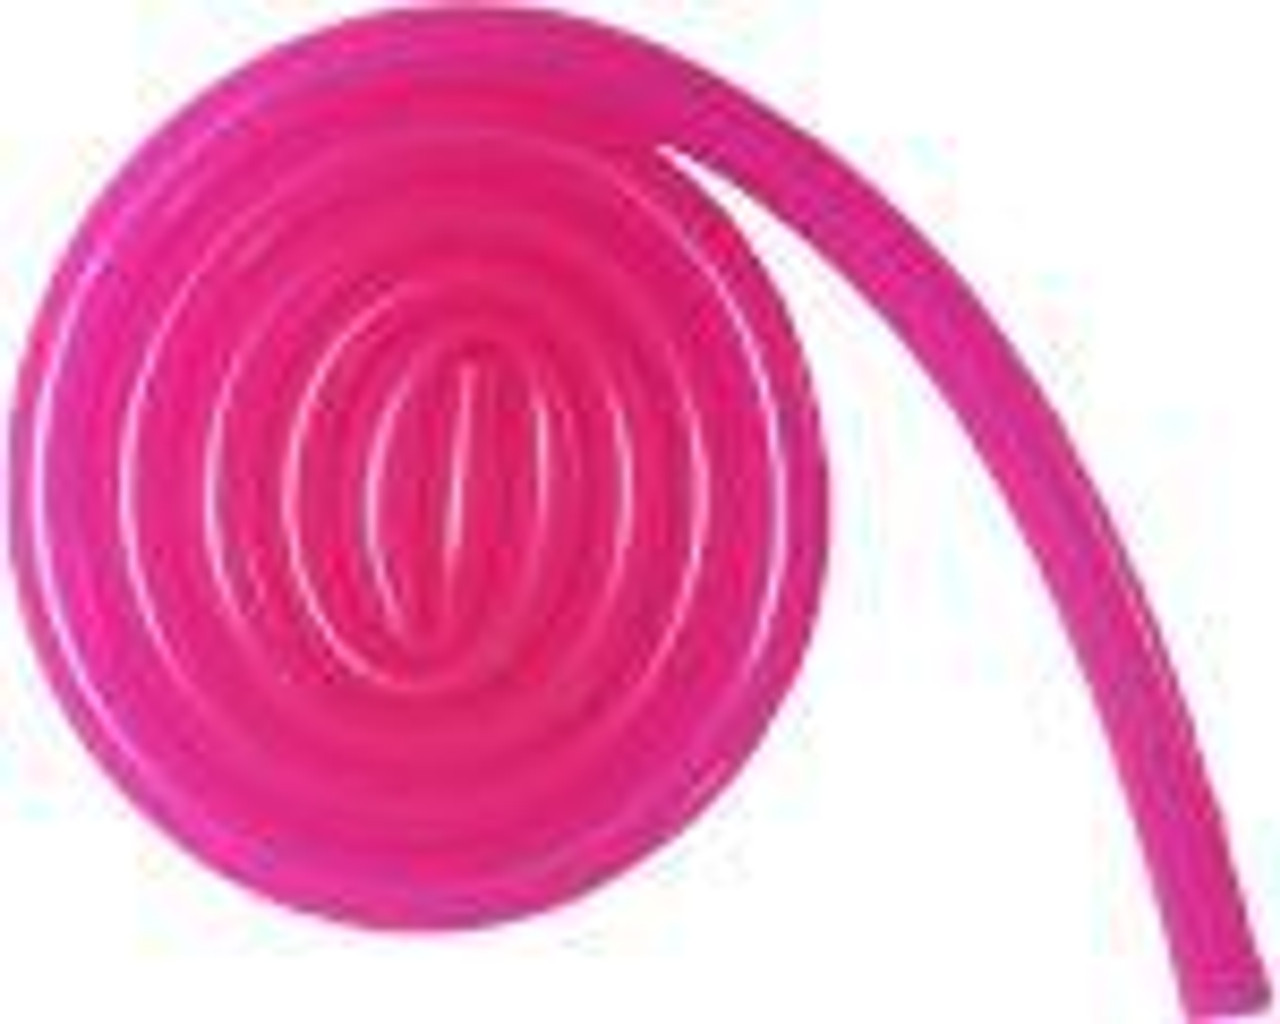 https://cdn11.bigcommerce.com/s-i6ykqoitnd/images/stencil/1280x1280/products/10491/59338/fish-field-silicone-lure-tubing-lure-building-components-materials-fish-field-pink-349590__95110.1639601254.jpg?c=1&imbypass=on